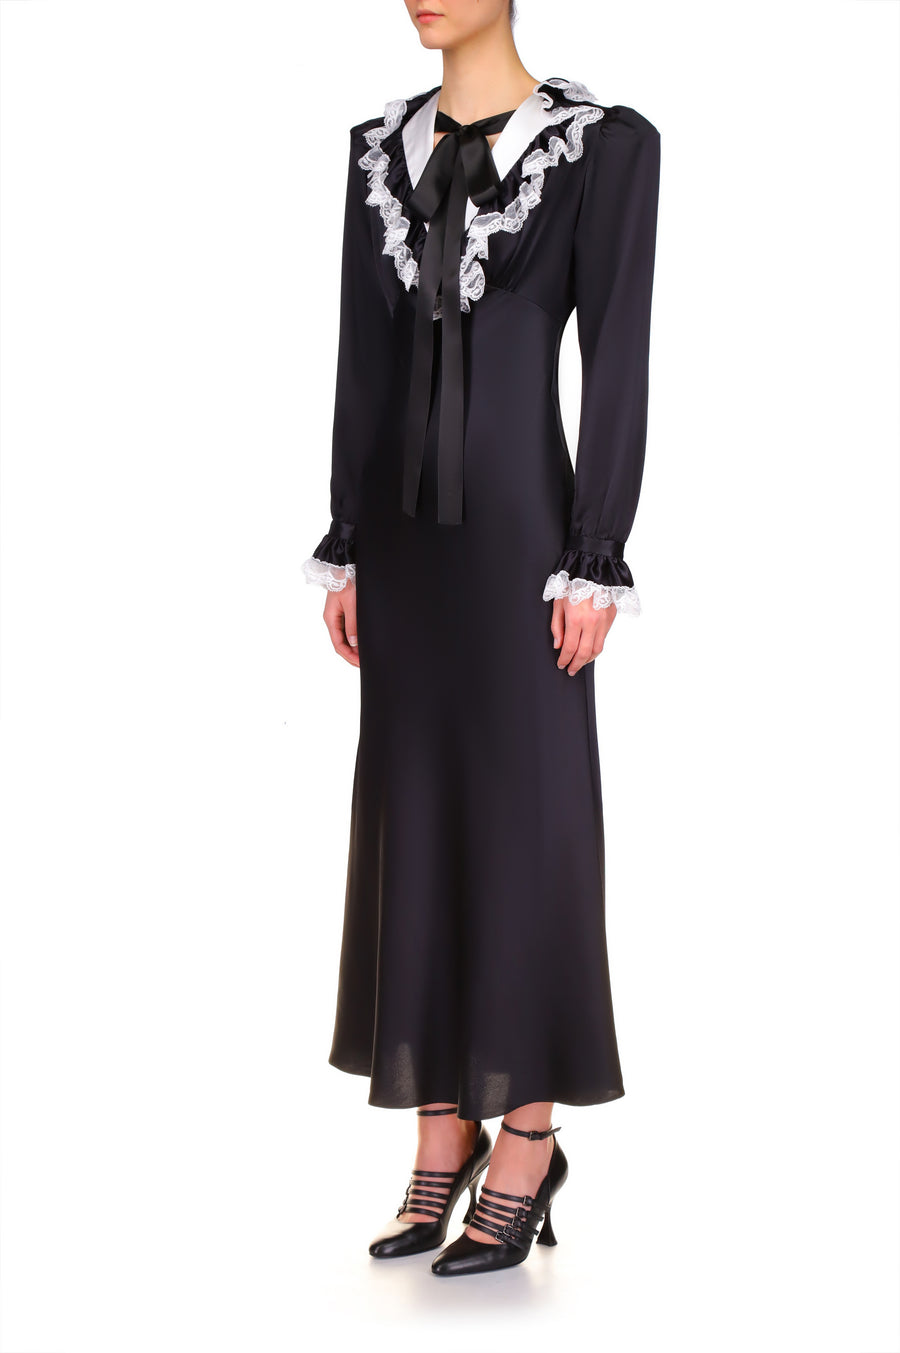 Black Silk Long Sleeve Dress With Off White Collar And Lace Trim